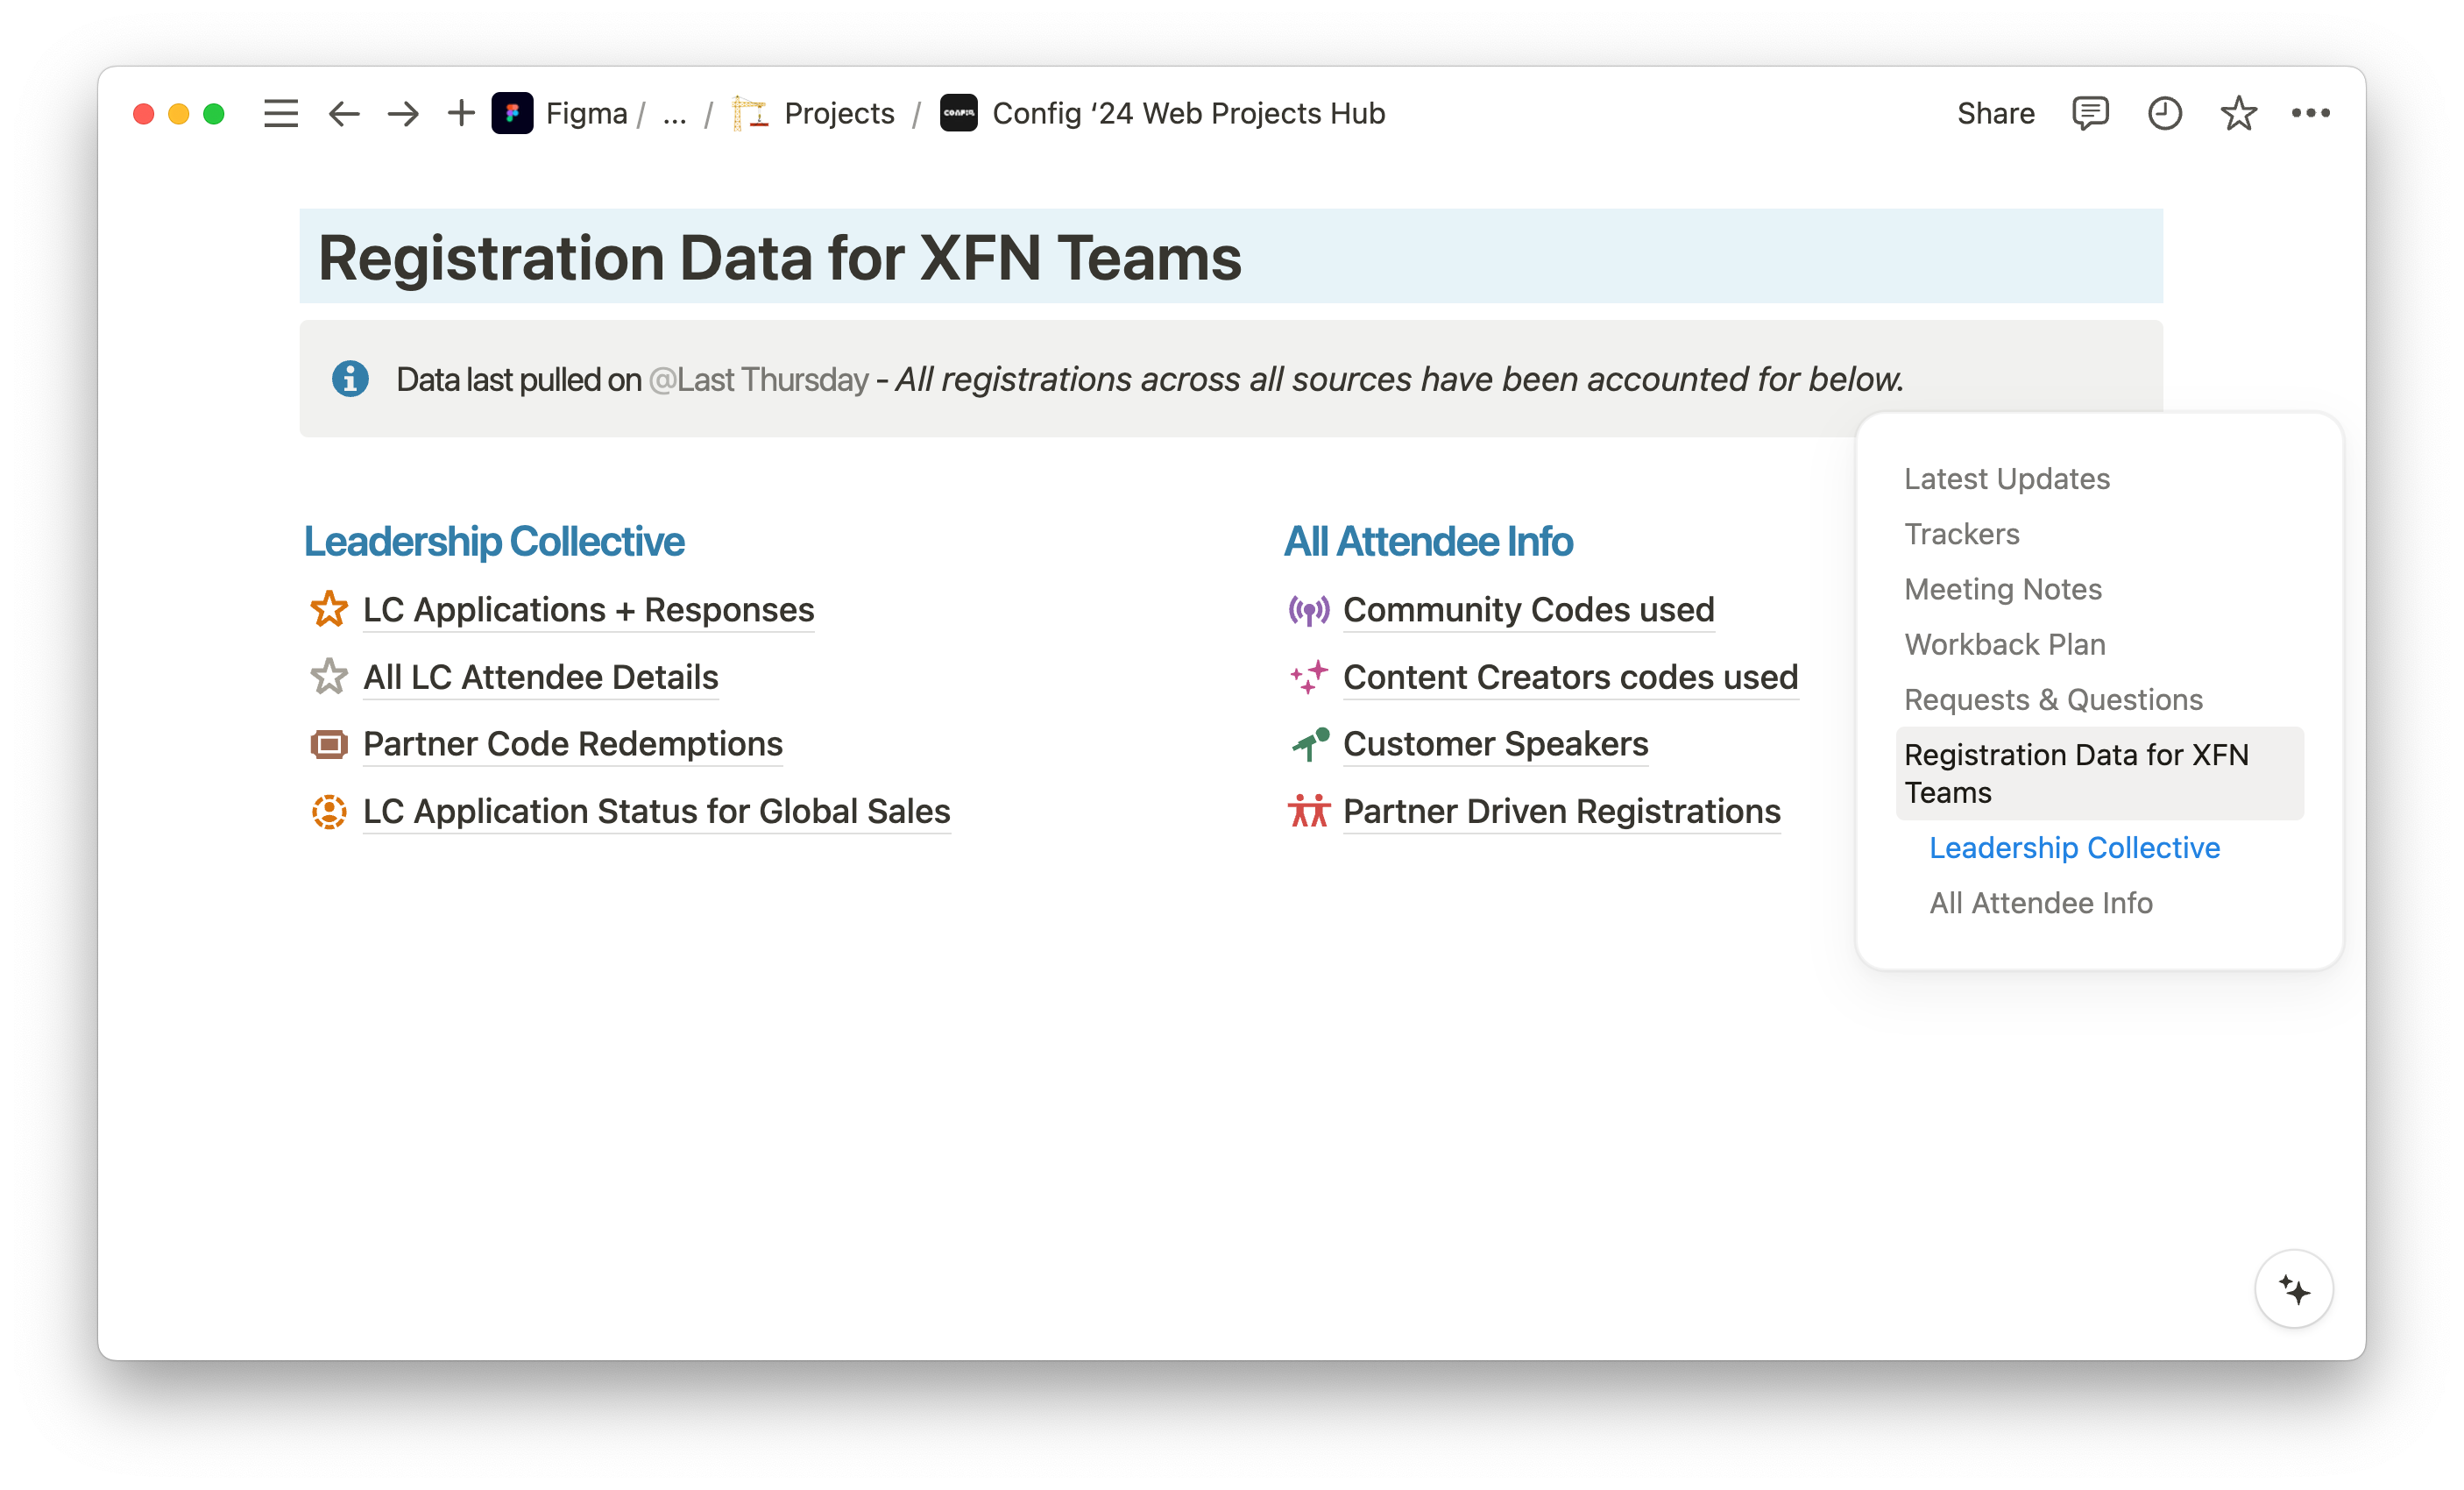 XFN teams has a single place to find all of the latest data that they needed